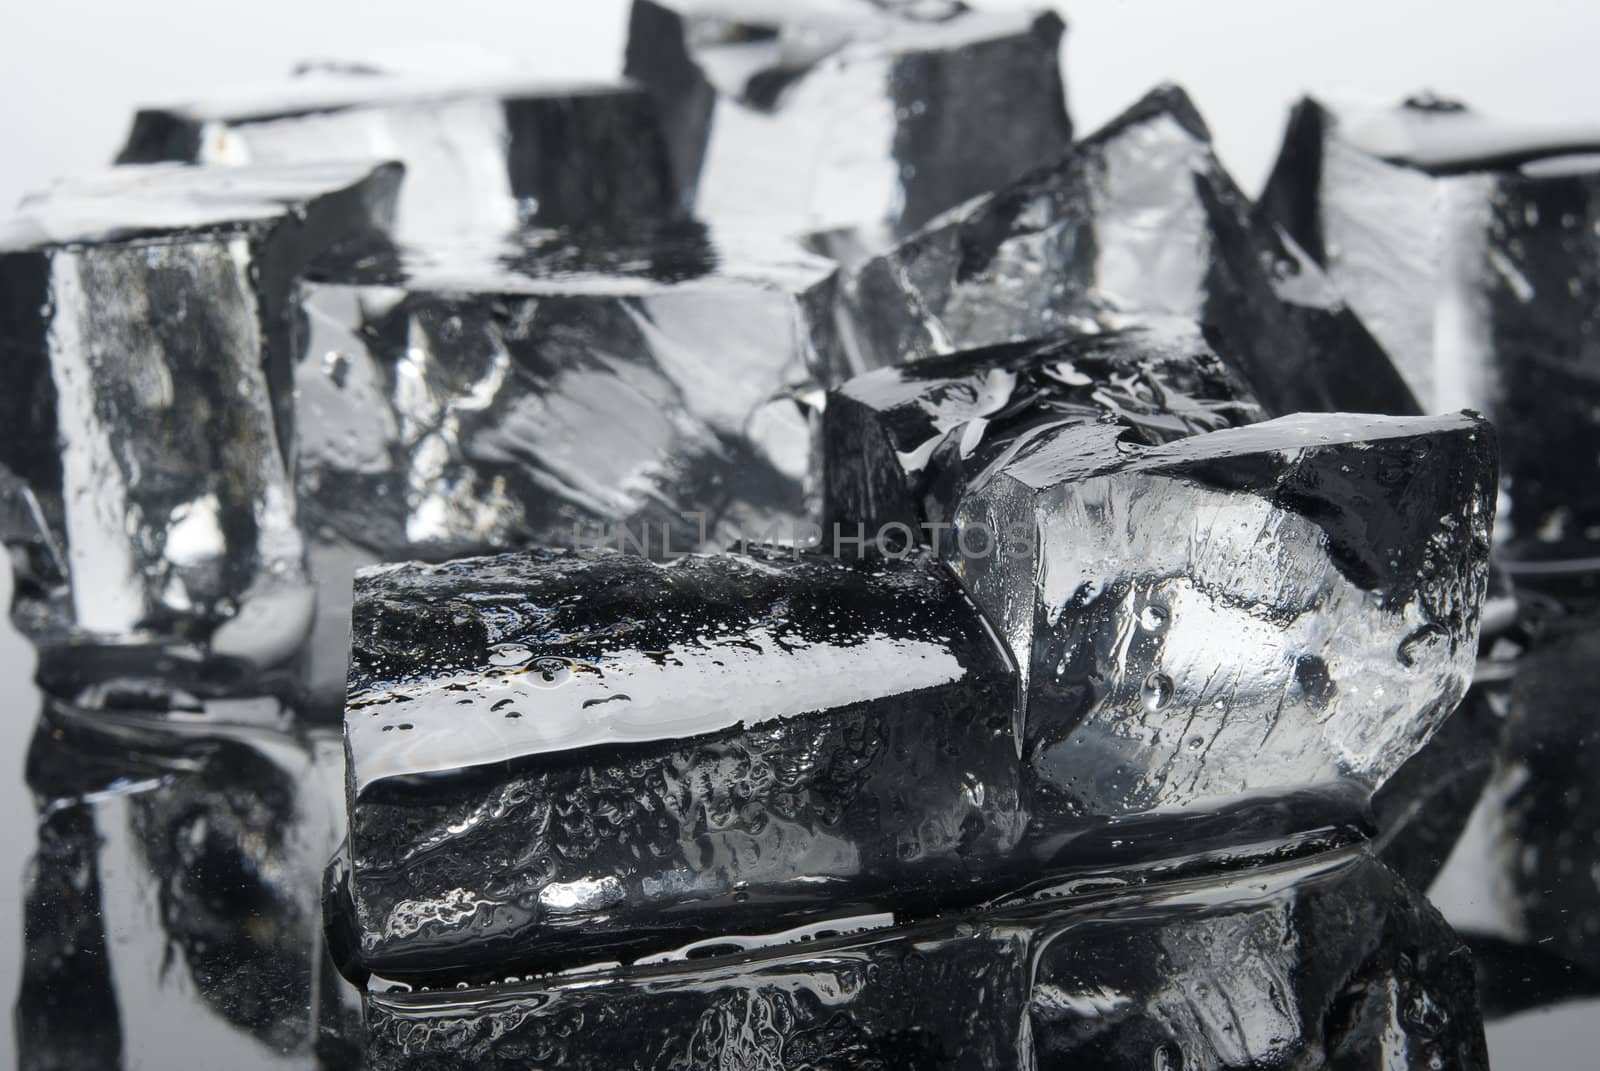 Clear ice cubes close-up. Isolated on light background